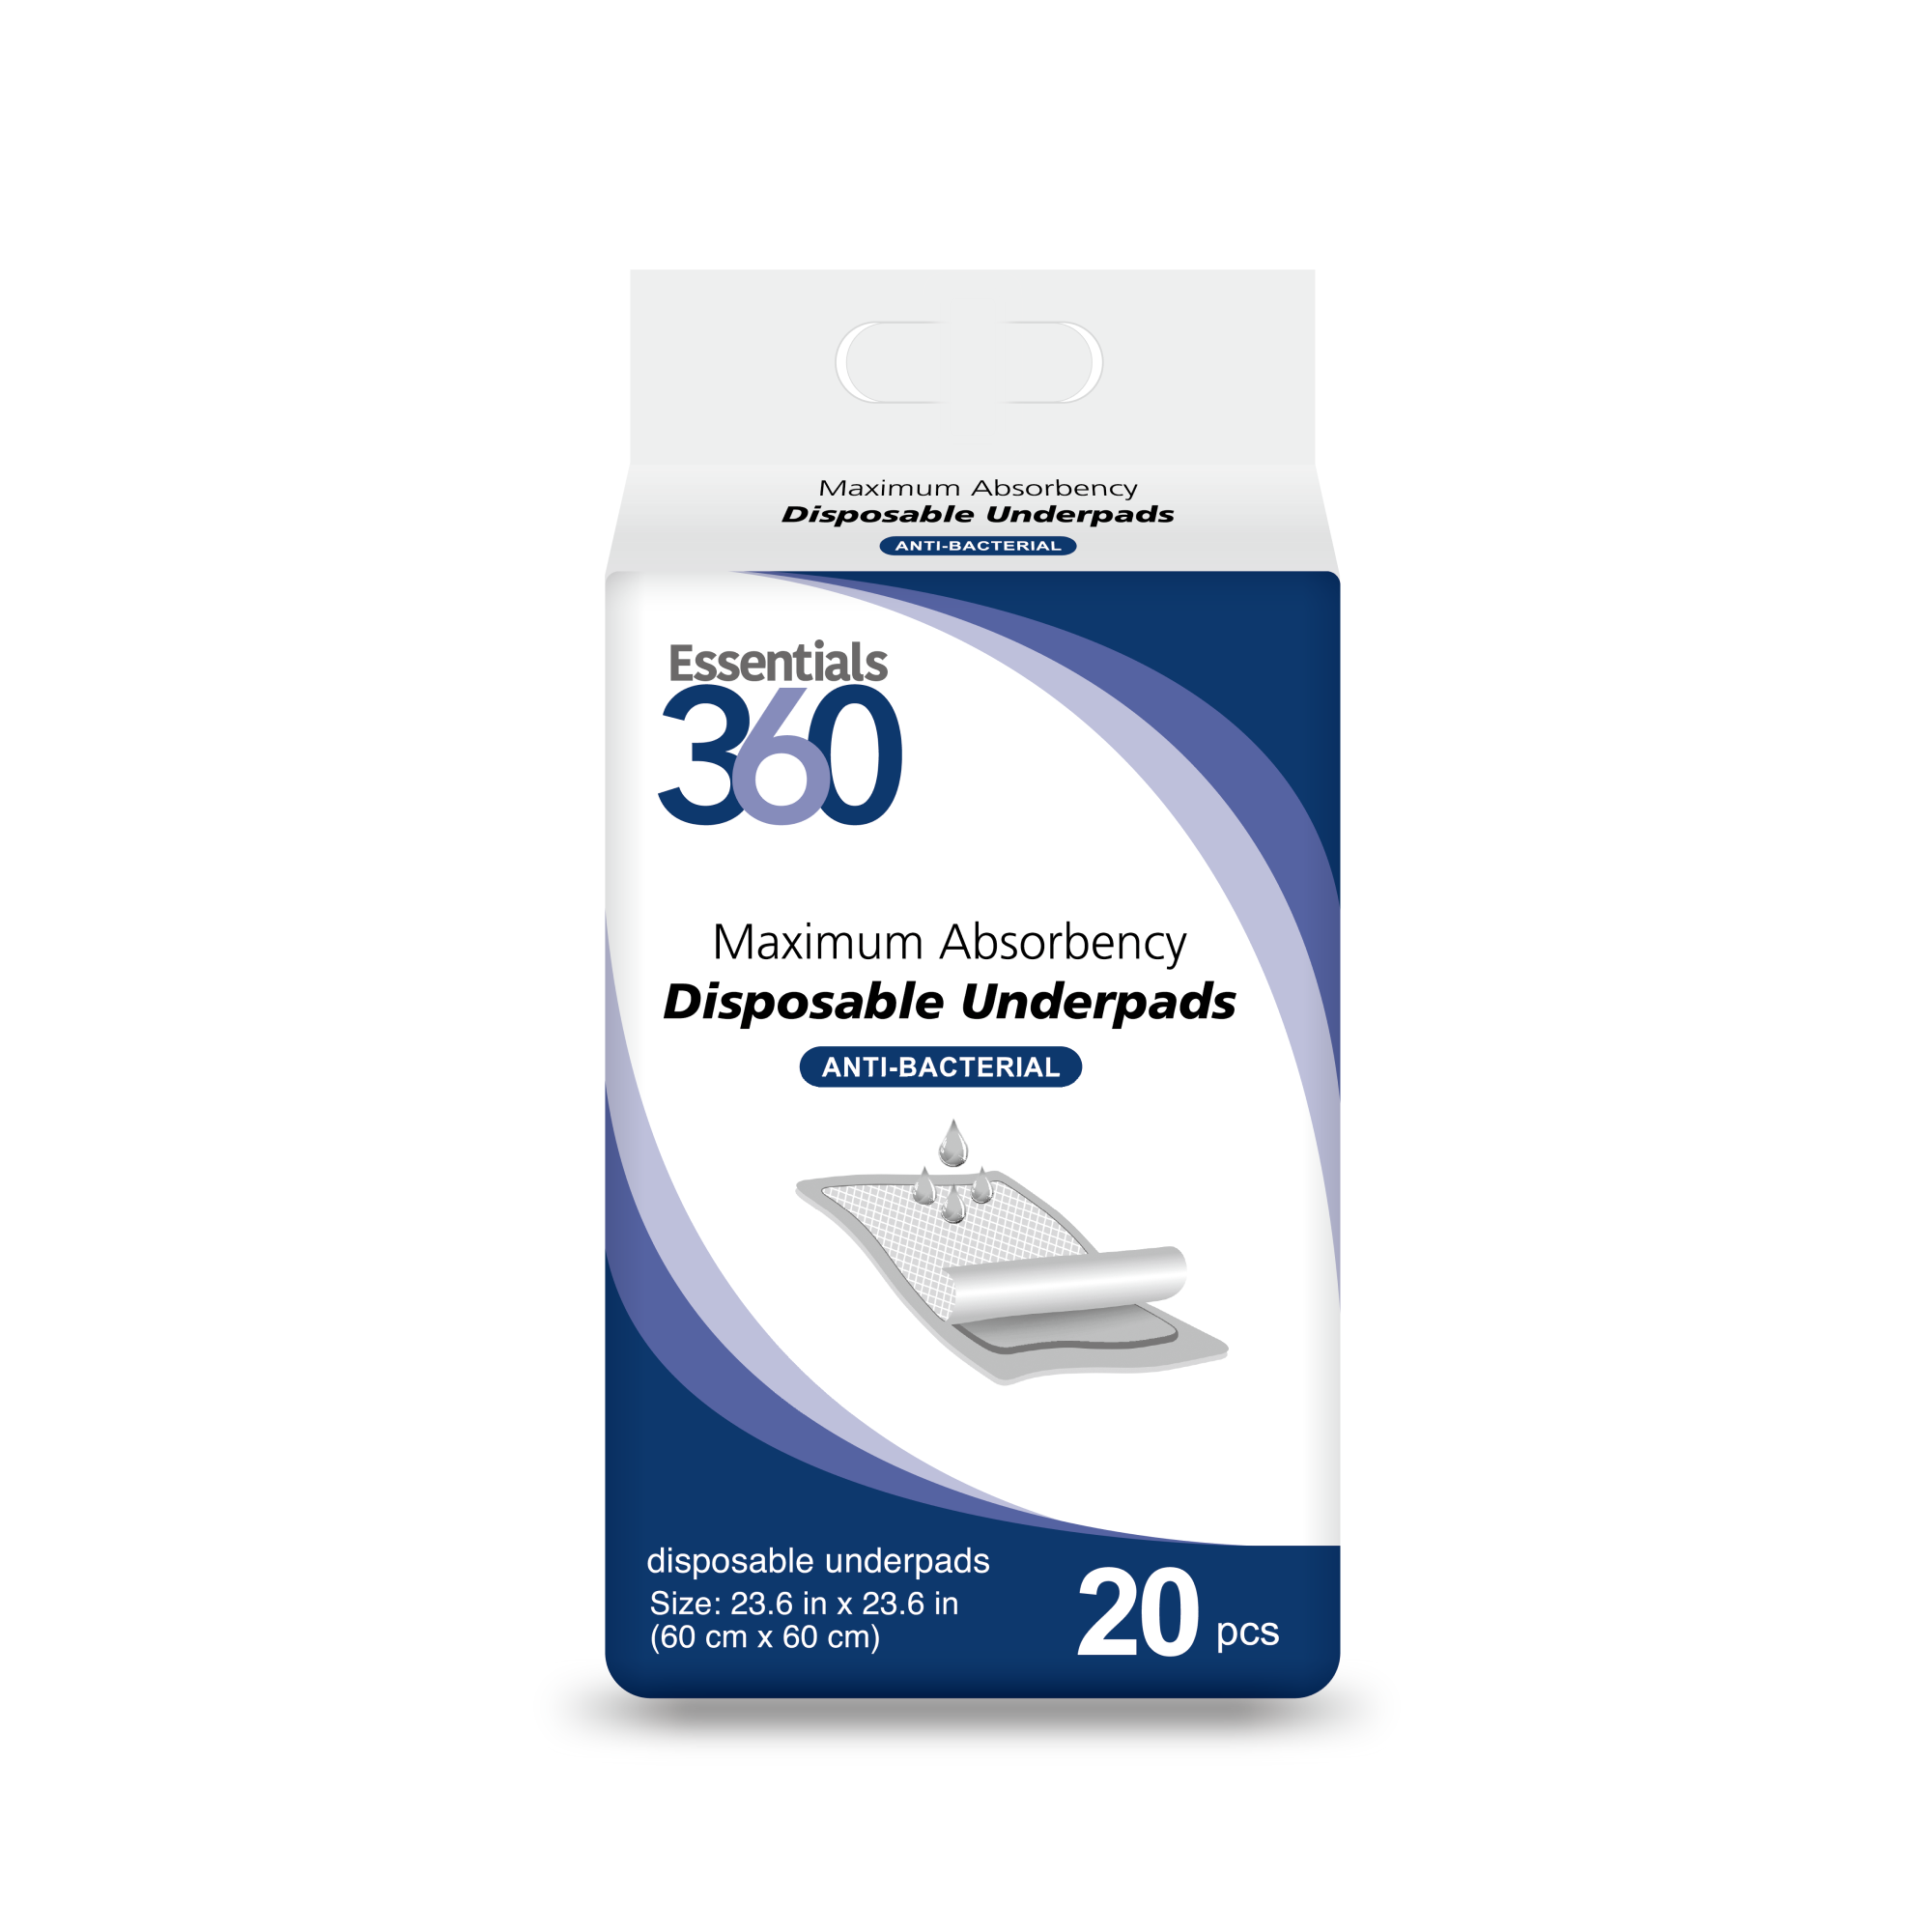 Maximum Absorbency Disposable Underpads - Essentials 360